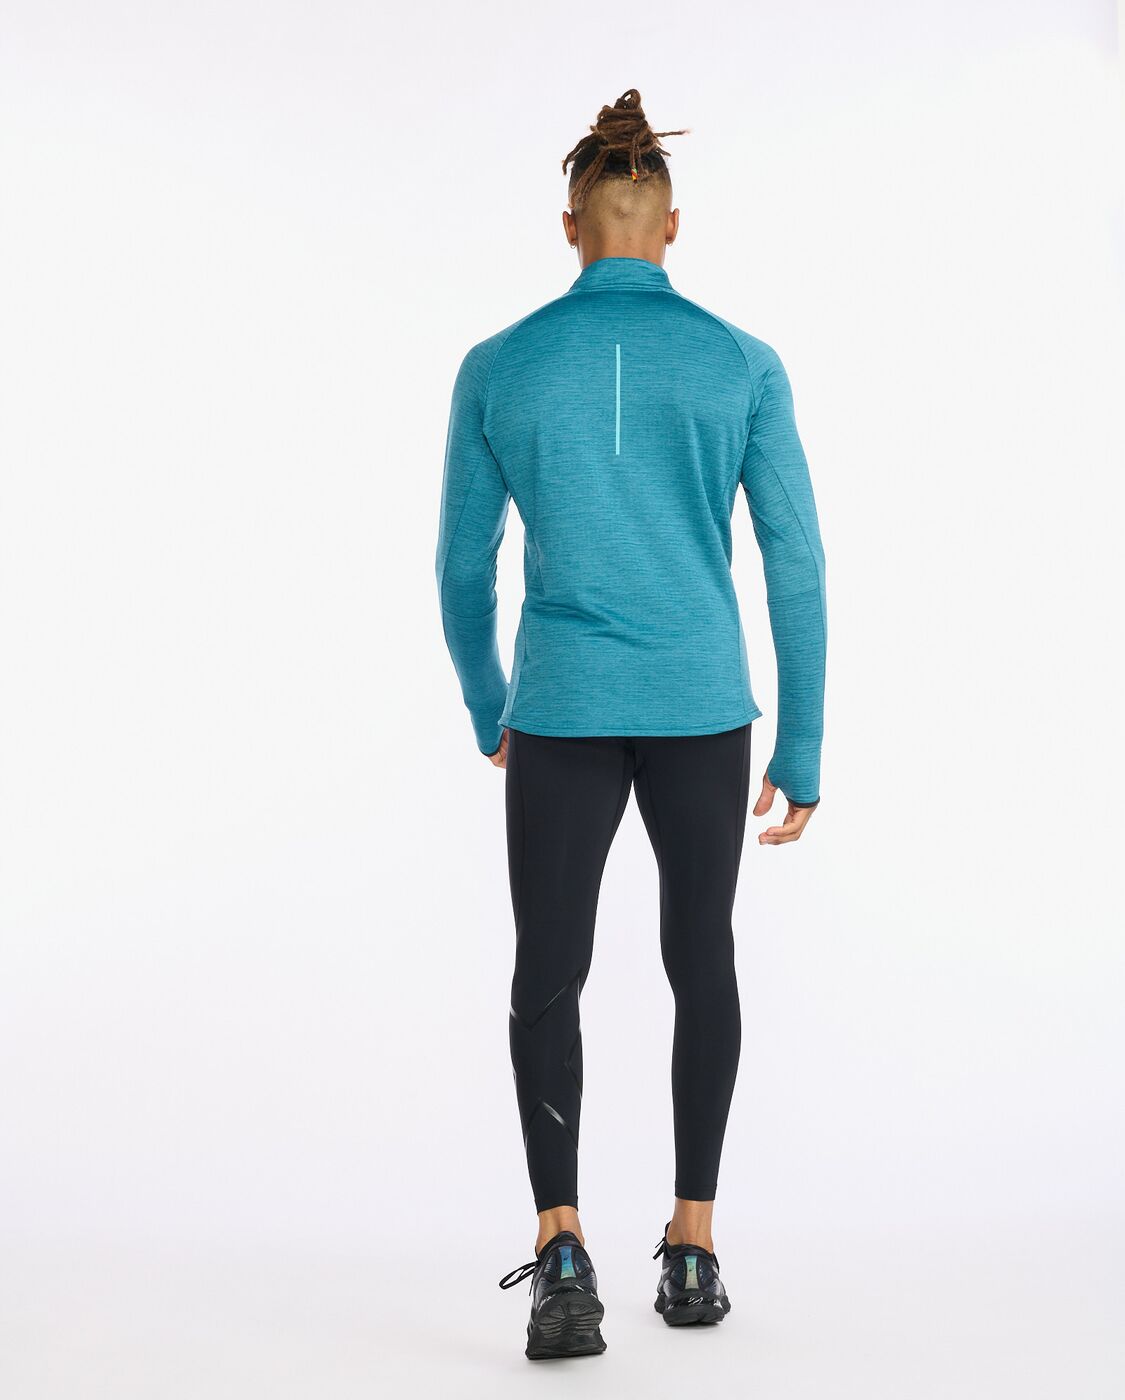 2XU South Africa - Men's Ignition layered 1/4 Zip Long Sleeve - Oceanside/Porcelain Reflective